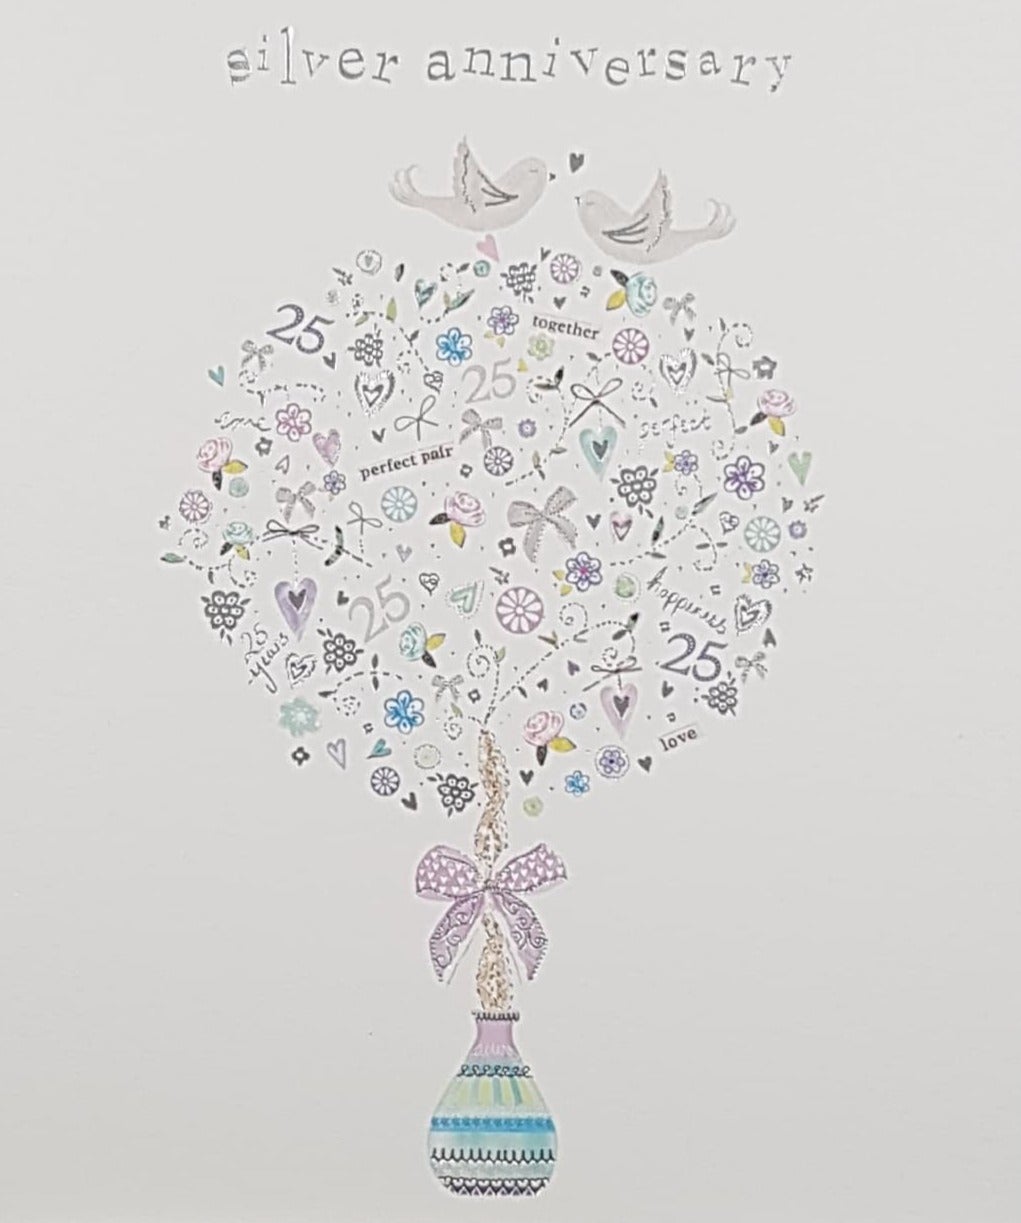 Anniversary Card - 25th Anniversary / Two Birds On A Round Tree With A Pink Bow